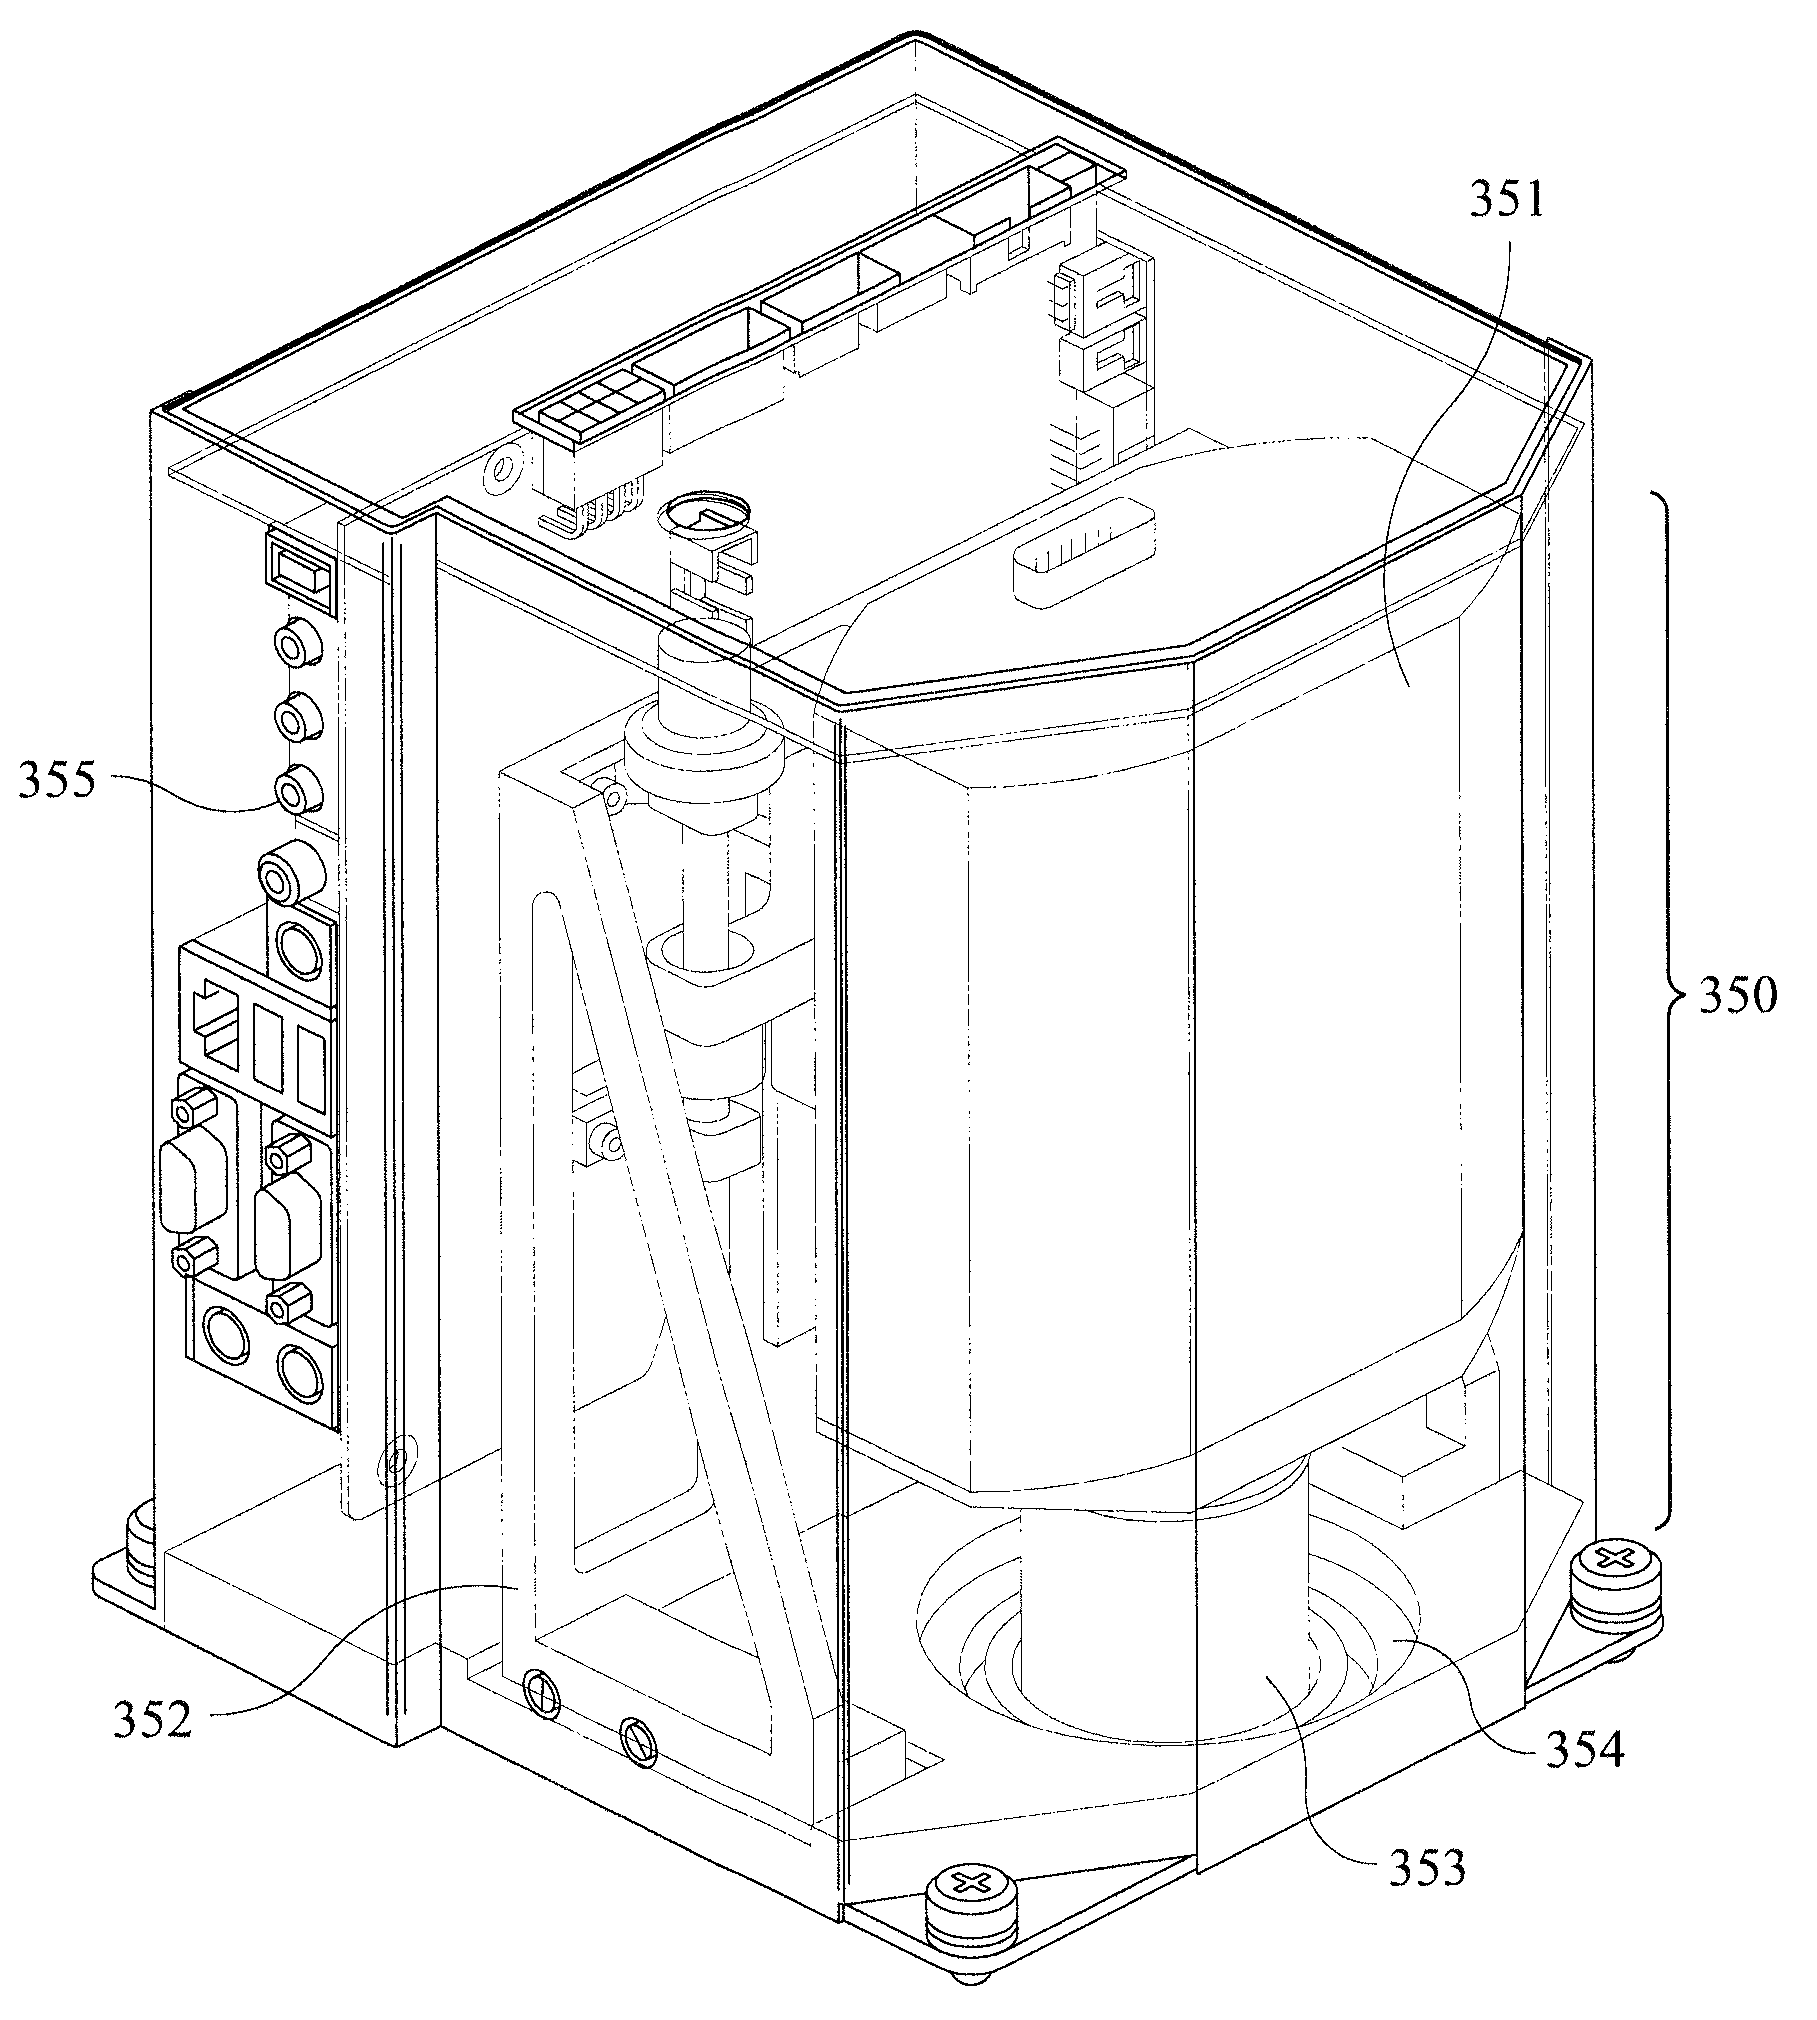 Replaceable detection module and an apparatus for conducting luminescence assays